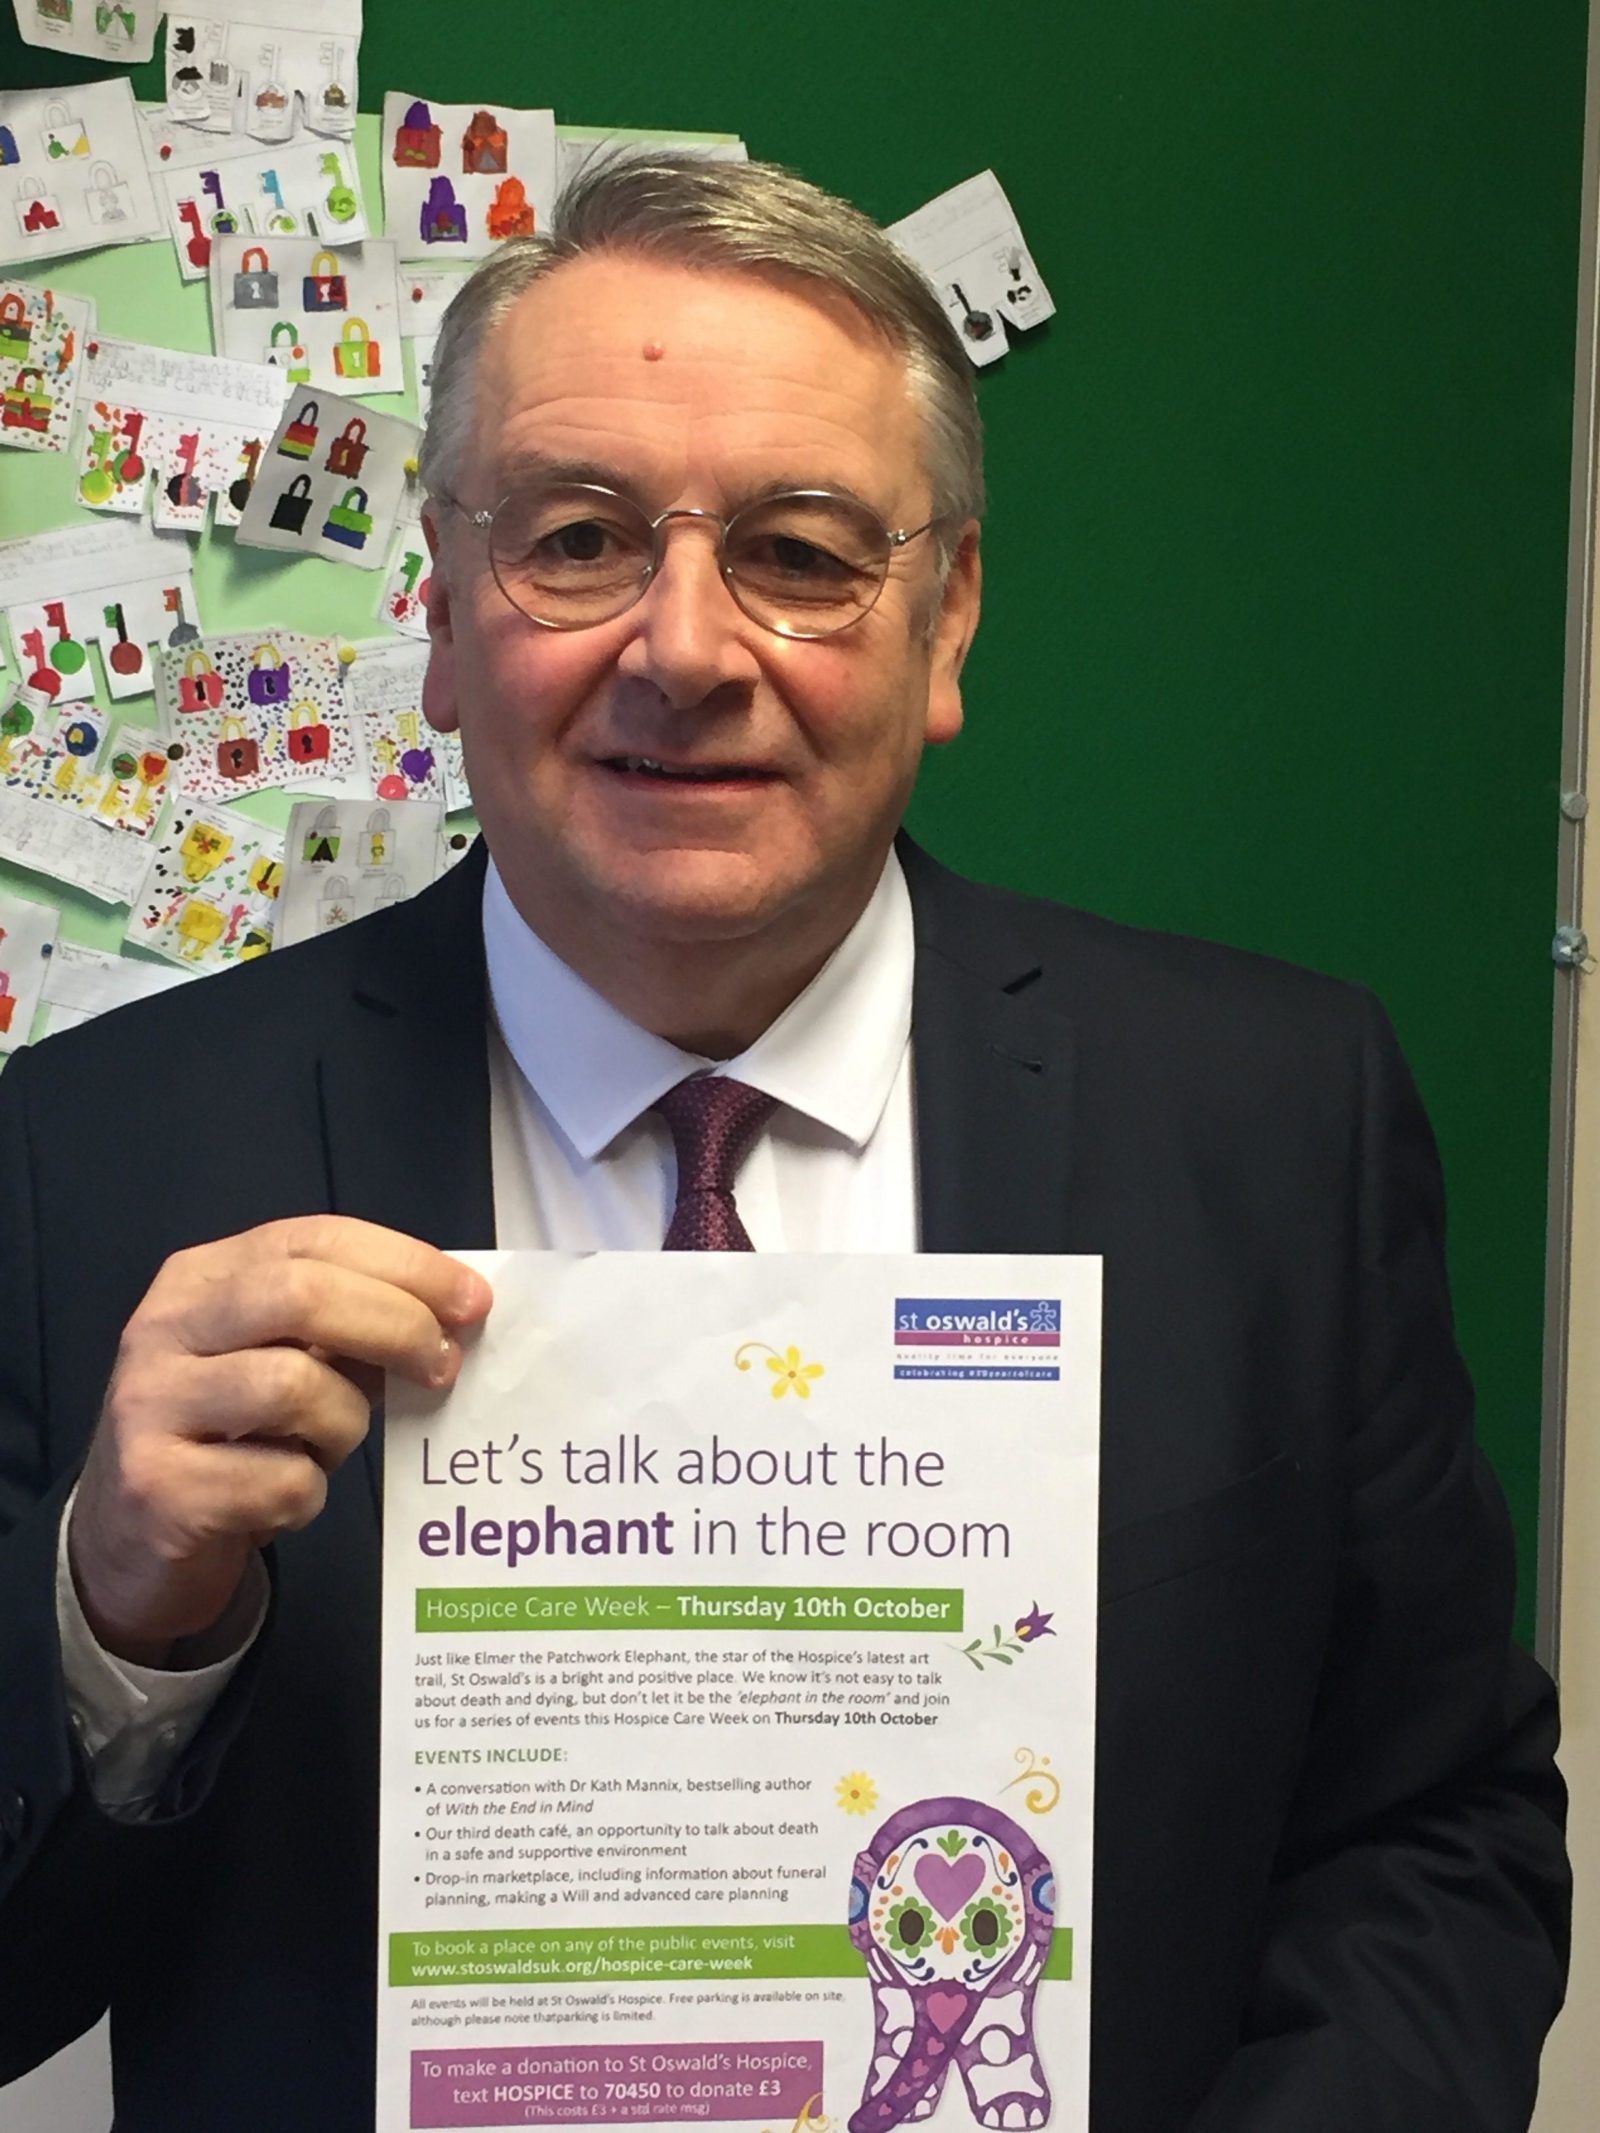 Alan Campbell supporting Hospice Care Week